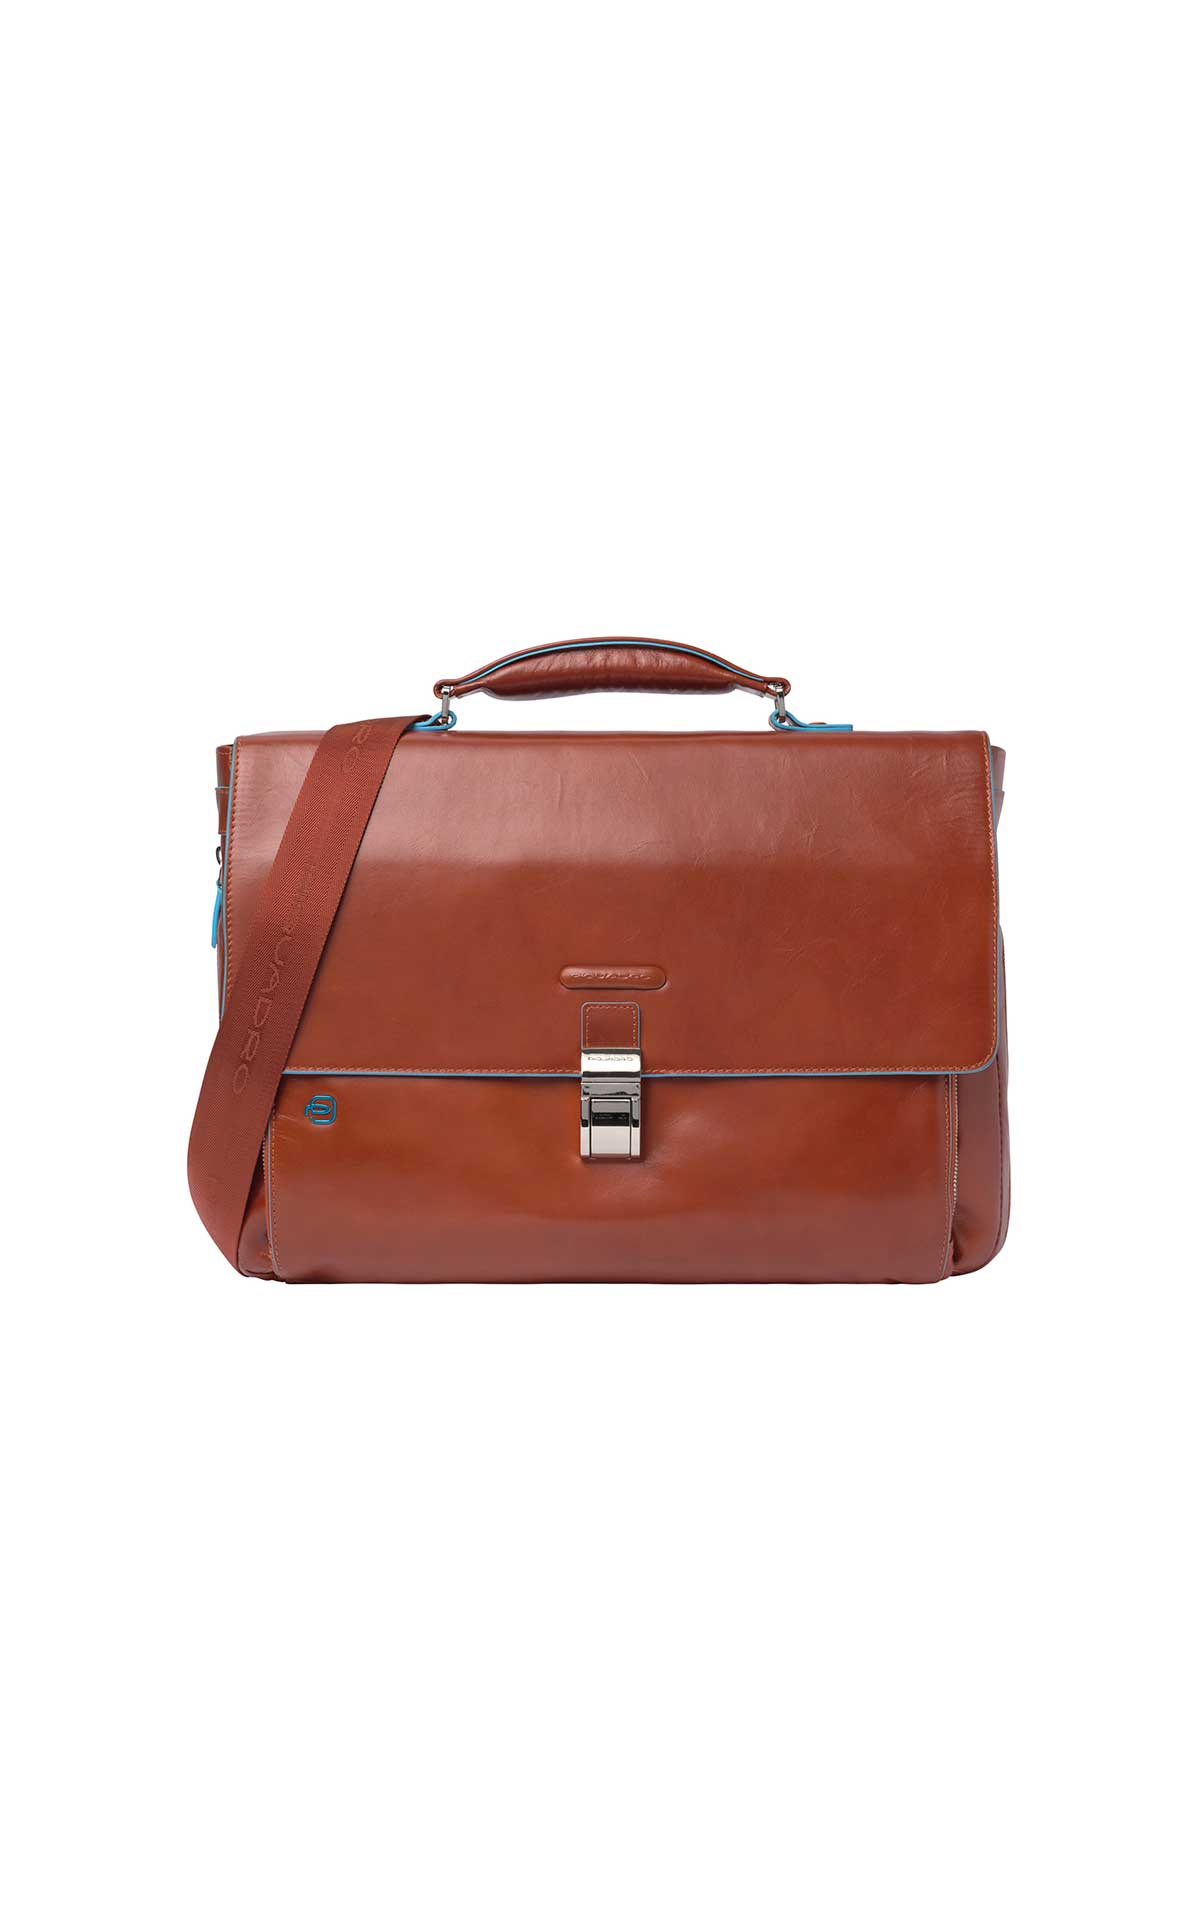 Leather brown briefcase Piquadro